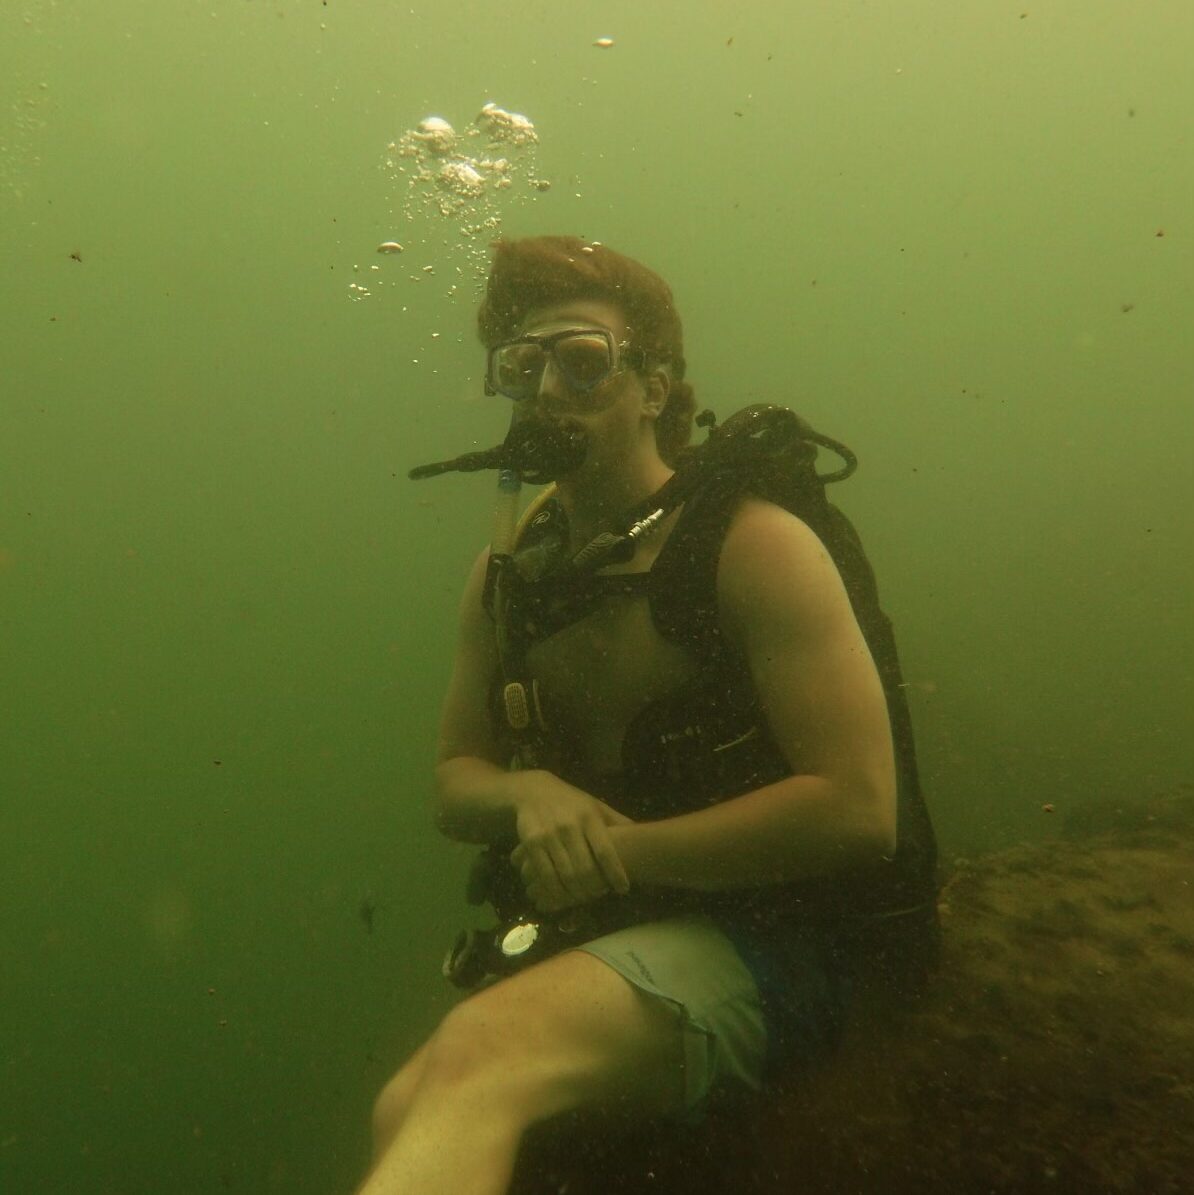 Tom Silldorff goofily posing for a photo while underwater scuba diving. 